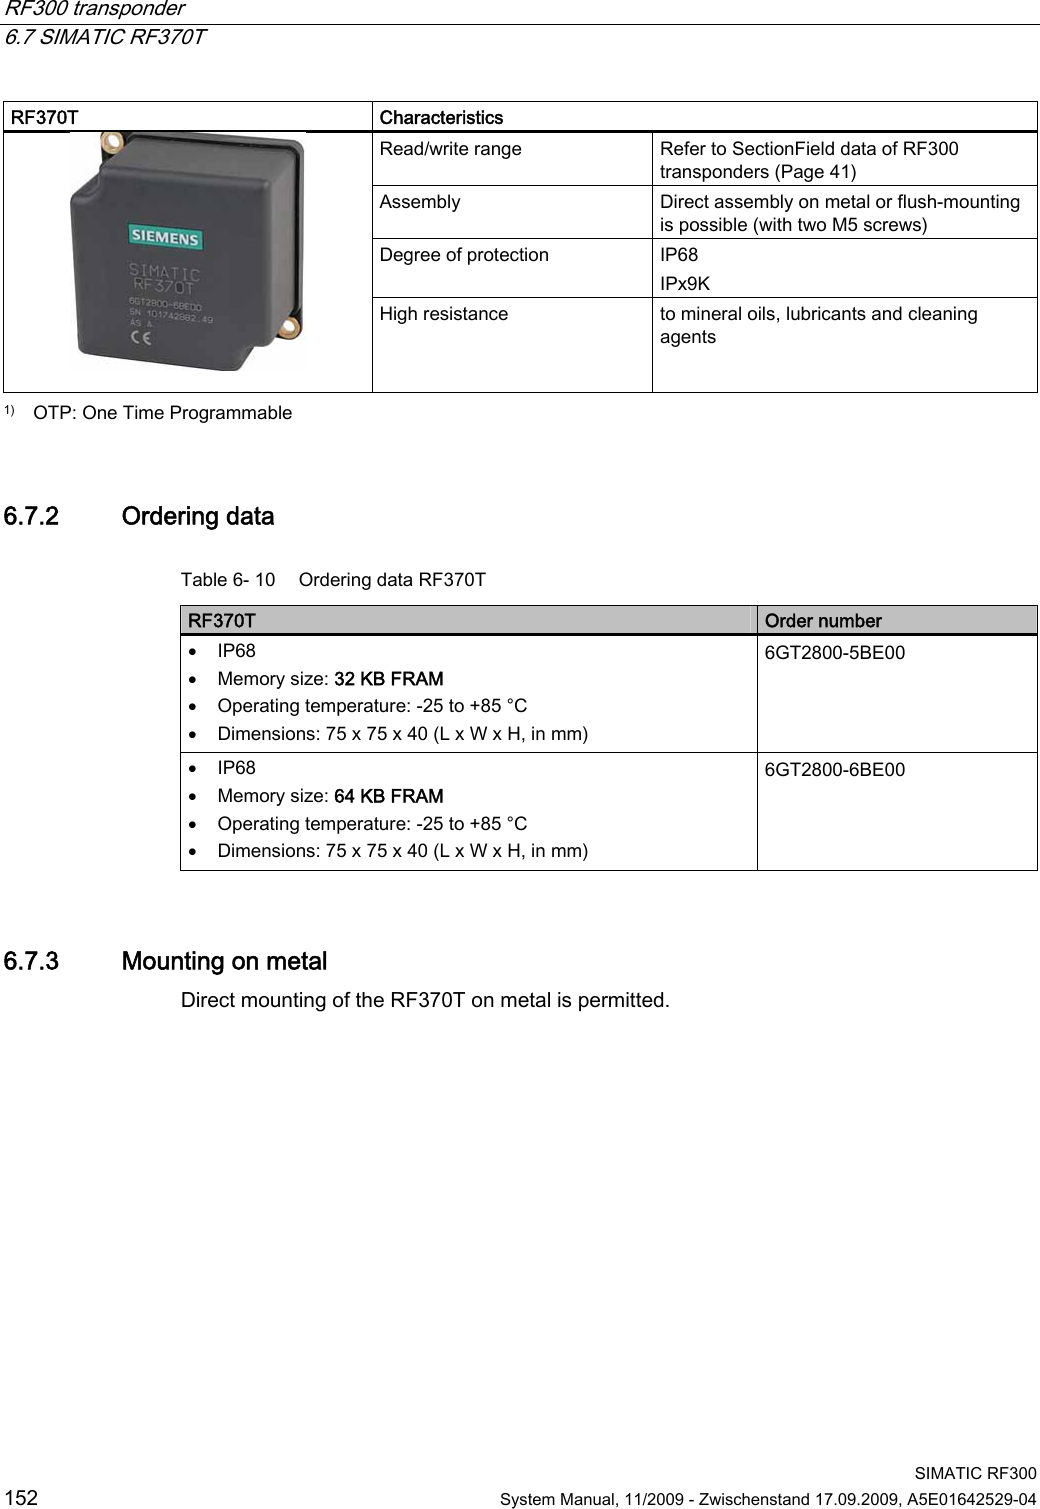 RF300 transponder   6.7 SIMATIC RF370T  SIMATIC RF300 152  System Manual, 11/2009 - Zwischenstand 17.09.2009, A5E01642529-04 RF370T  Characteristics Read/write range  Refer to SectionField data of RF300 transponders (Page 41) Assembly  Direct assembly on metal or flush-mounting is possible (with two M5 screws) Degree of protection  IP68 IPx9K   High resistance  to mineral oils, lubricants and cleaning agents 1)   OTP: One Time Programmable 6.7.2 Ordering data Table 6- 10  Ordering data RF370T RF370T  Order number  IP68  Memory size: 32 KB FRAM   Operating temperature: -25 to +85 °C  Dimensions: 75 x 75 x 40 (L x W x H, in mm) 6GT2800-5BE00  IP68  Memory size: 64 KB FRAM  Operating temperature: -25 to +85 °C  Dimensions: 75 x 75 x 40 (L x W x H, in mm) 6GT2800-6BE00 6.7.3 Mounting on metal Direct mounting of the RF370T on metal is permitted.  